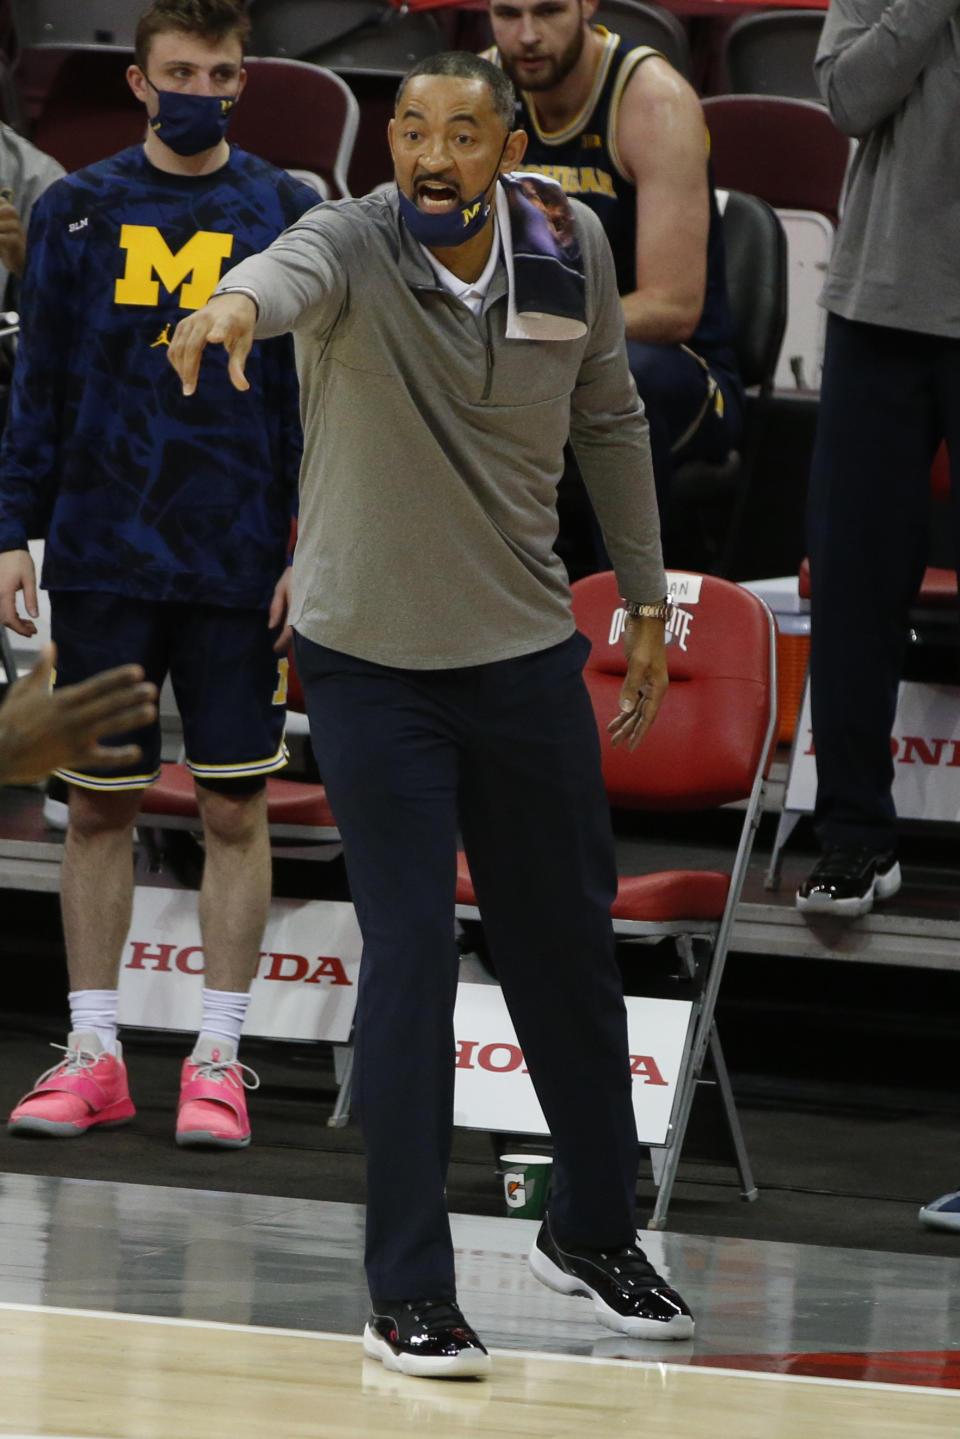 Michigan head coach Juwan Howard shouts to his team against Ohio State during the first half of an NCAA college basketball game Sunday, Feb. 21, 2021, in Columbus, Ohio. (AP Photo/Jay LaPrete)